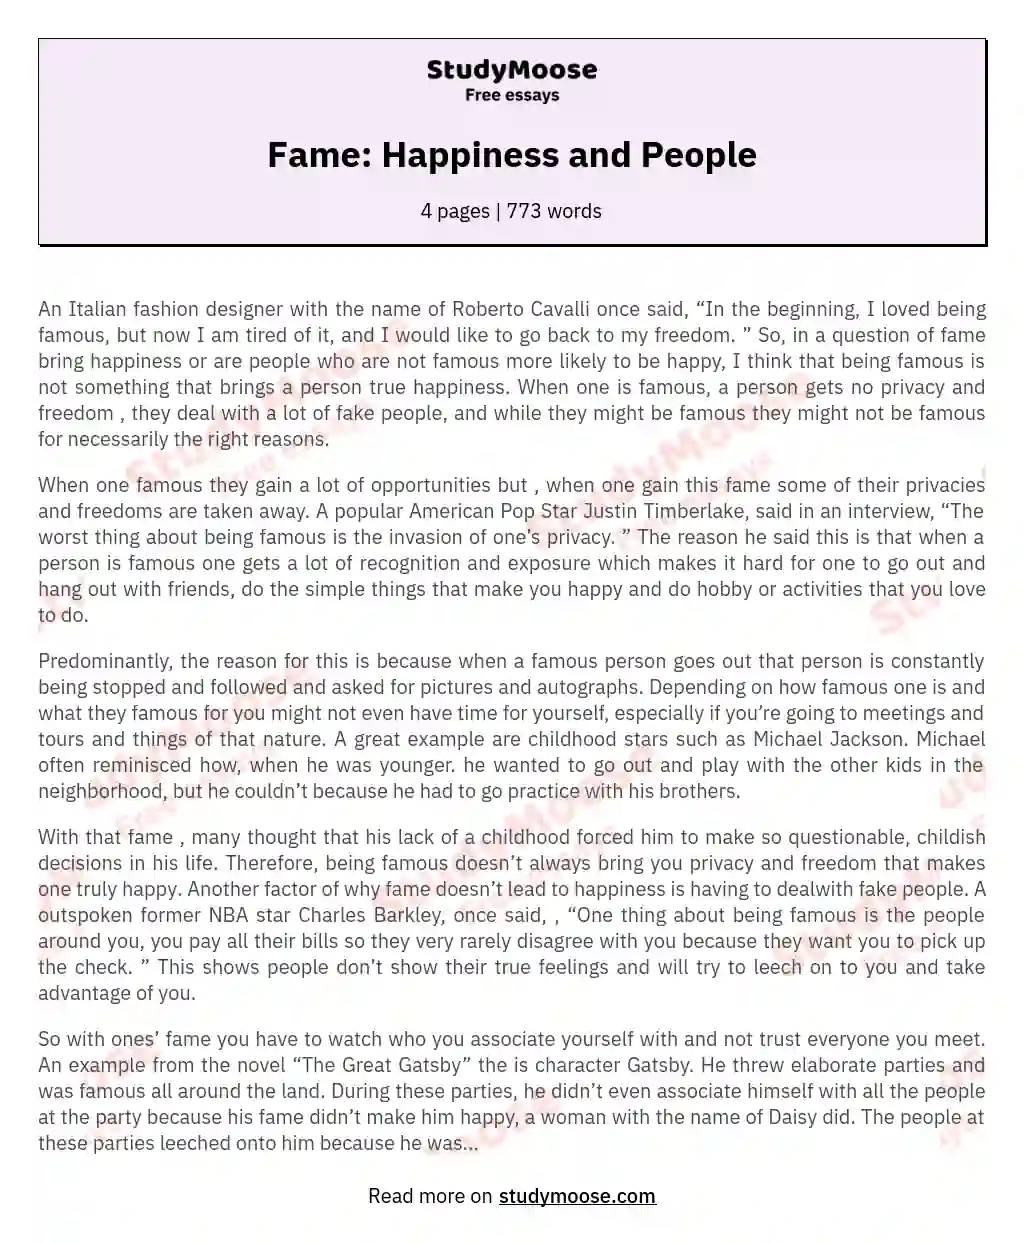 Fame: Happiness and People essay